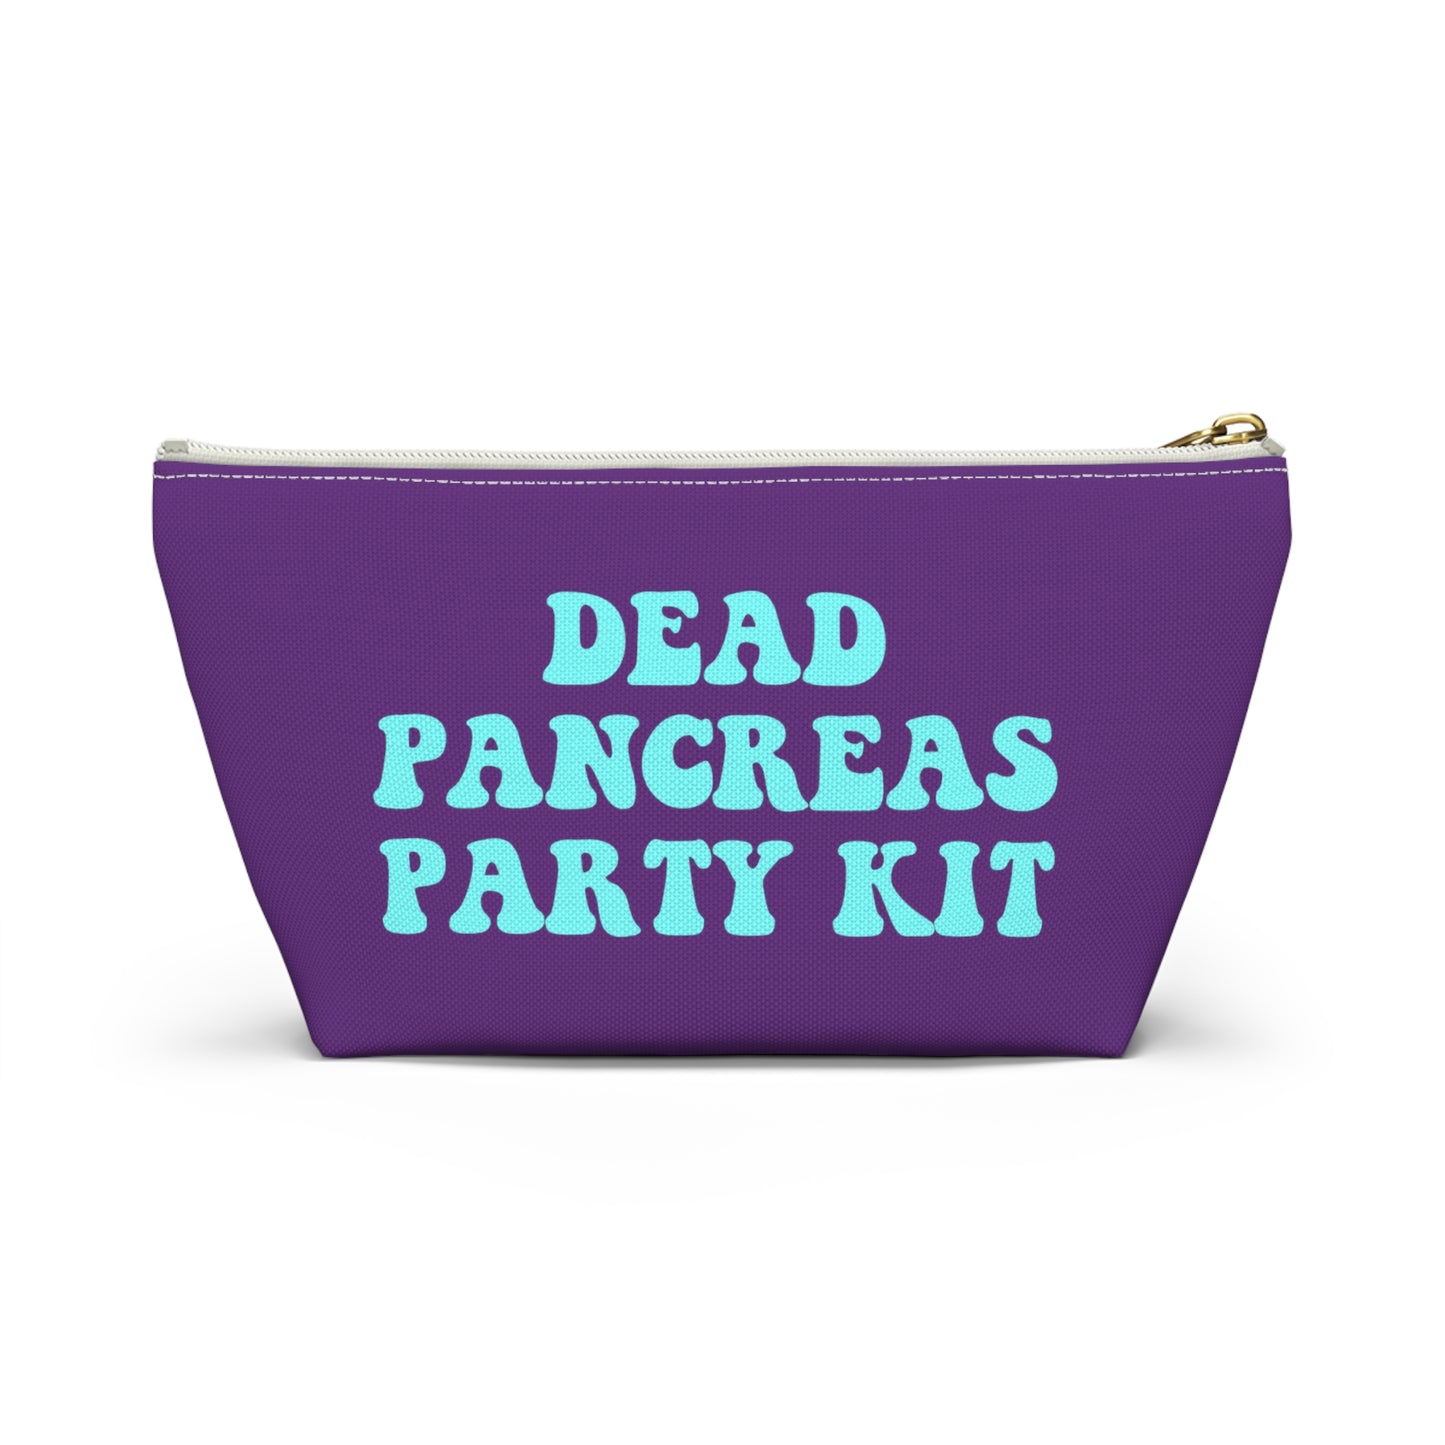 Dead Pancreas Party Kit Bag, Fun Diabetes Diabetic Supply Case Cute Carrying Organizer Gift Type 1 Travel Accessory Zipper Stand Up Pouch